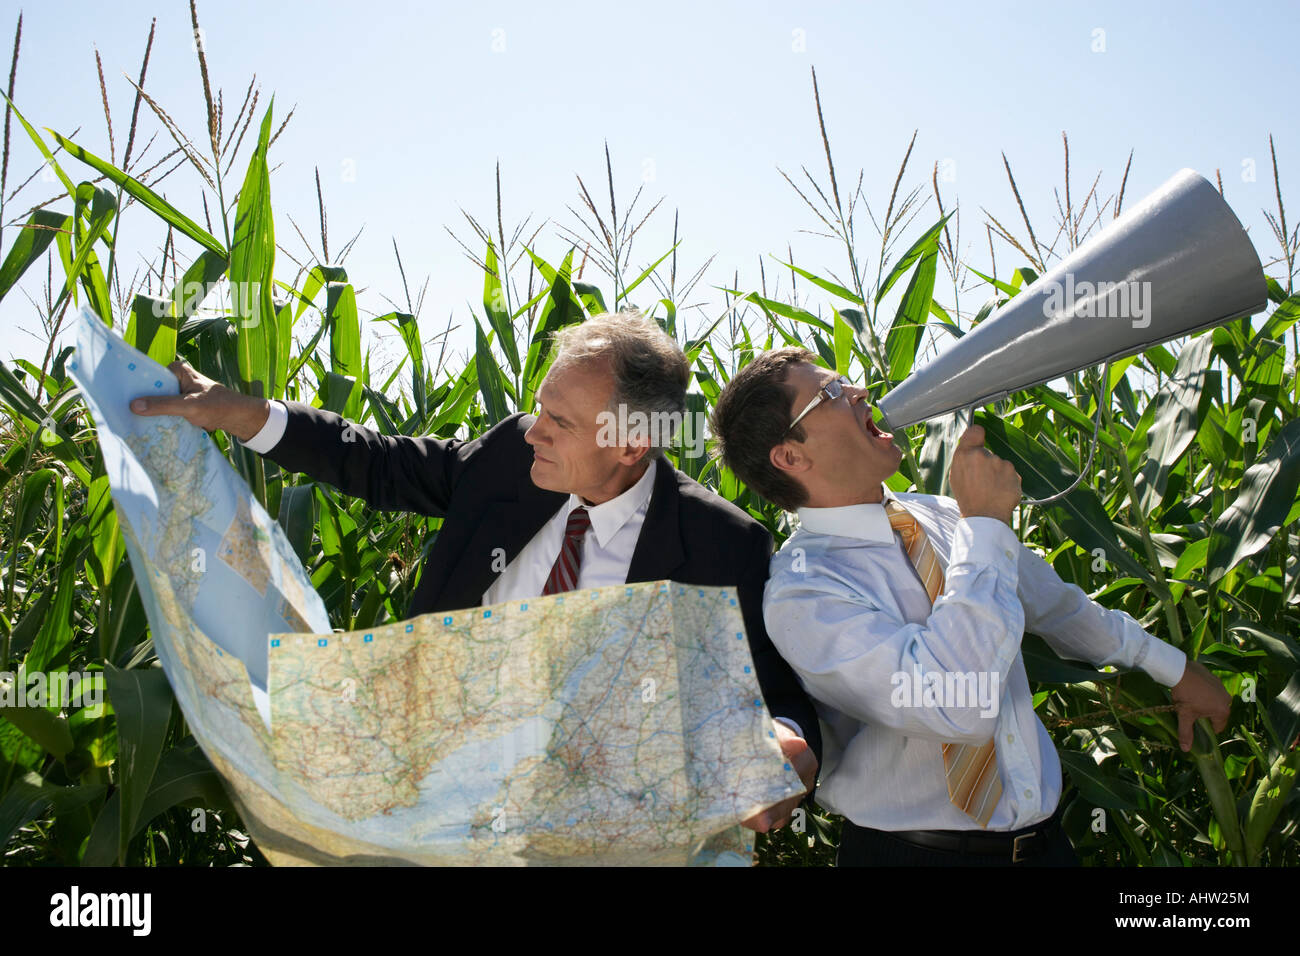 Businessmen in a cornfield with a map and megaphone. Stock Photo